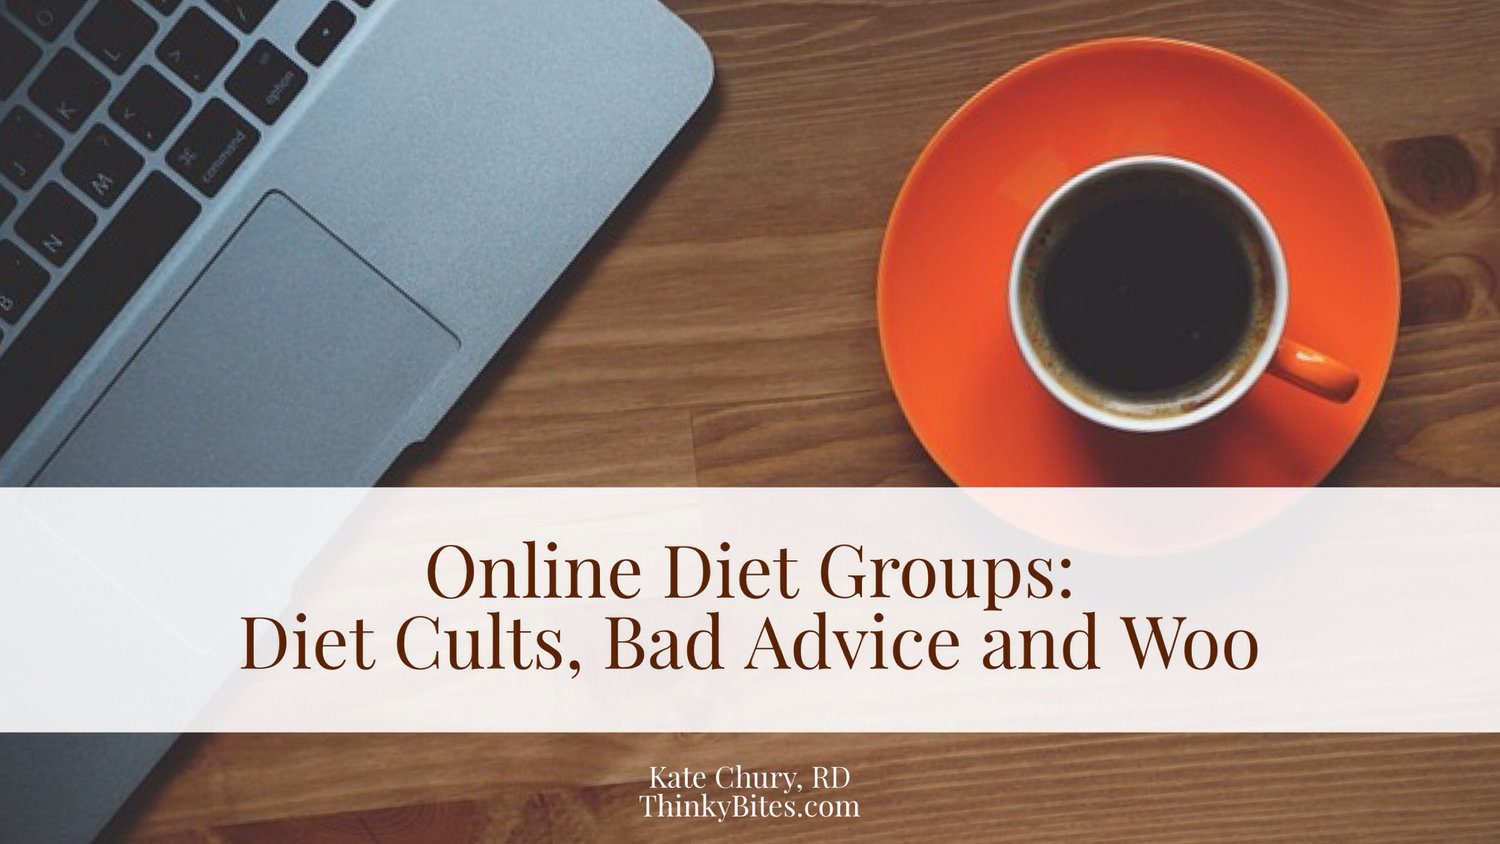 Online Diet Groups: Diet Cults, Bad Advice and Woo